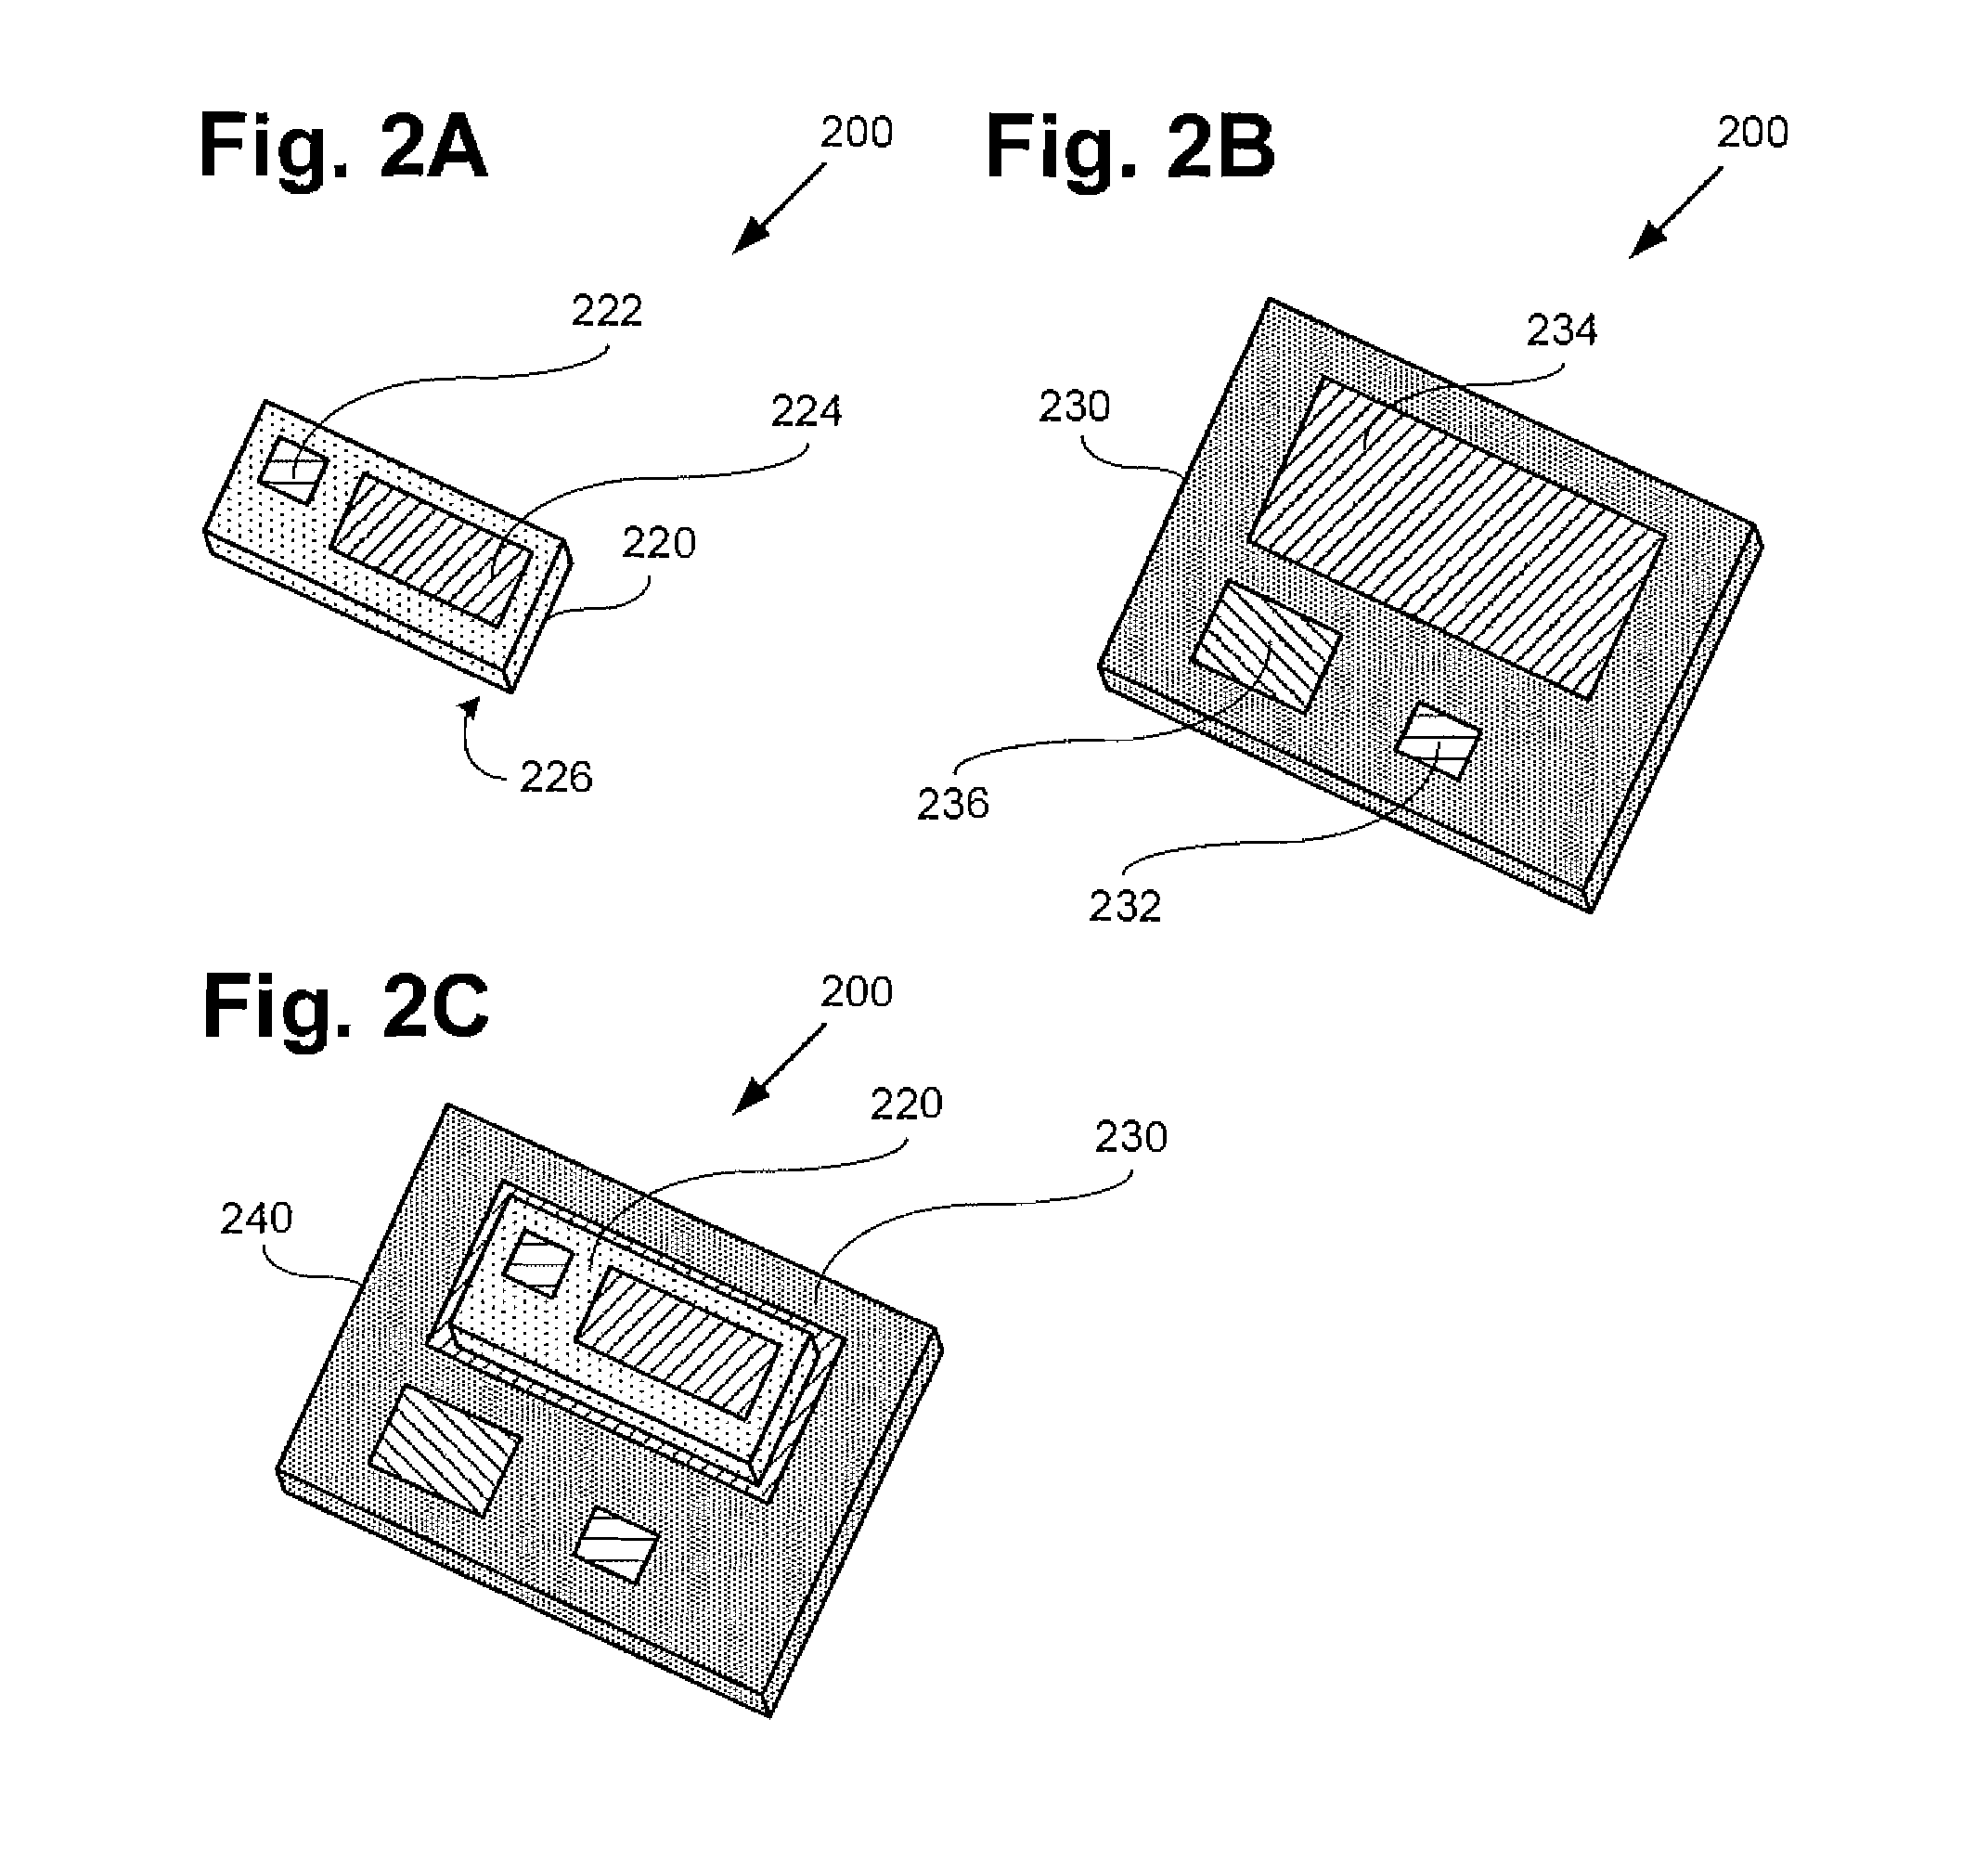 III-Nitride Transistor Stacked with FET in a Package